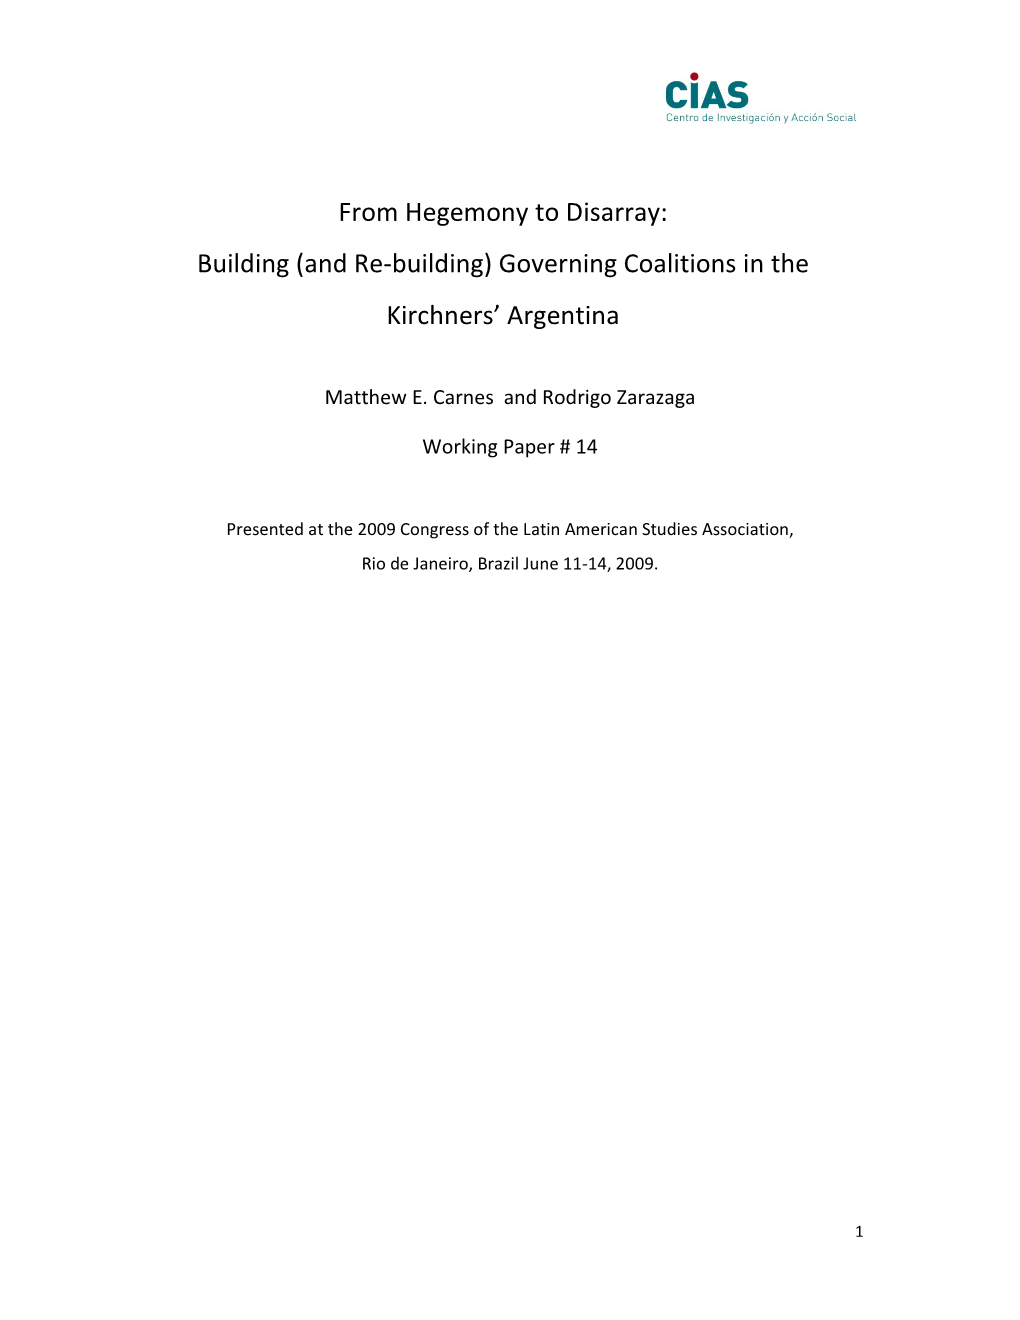 Governing Coalitions in the Kirchners' Argentina